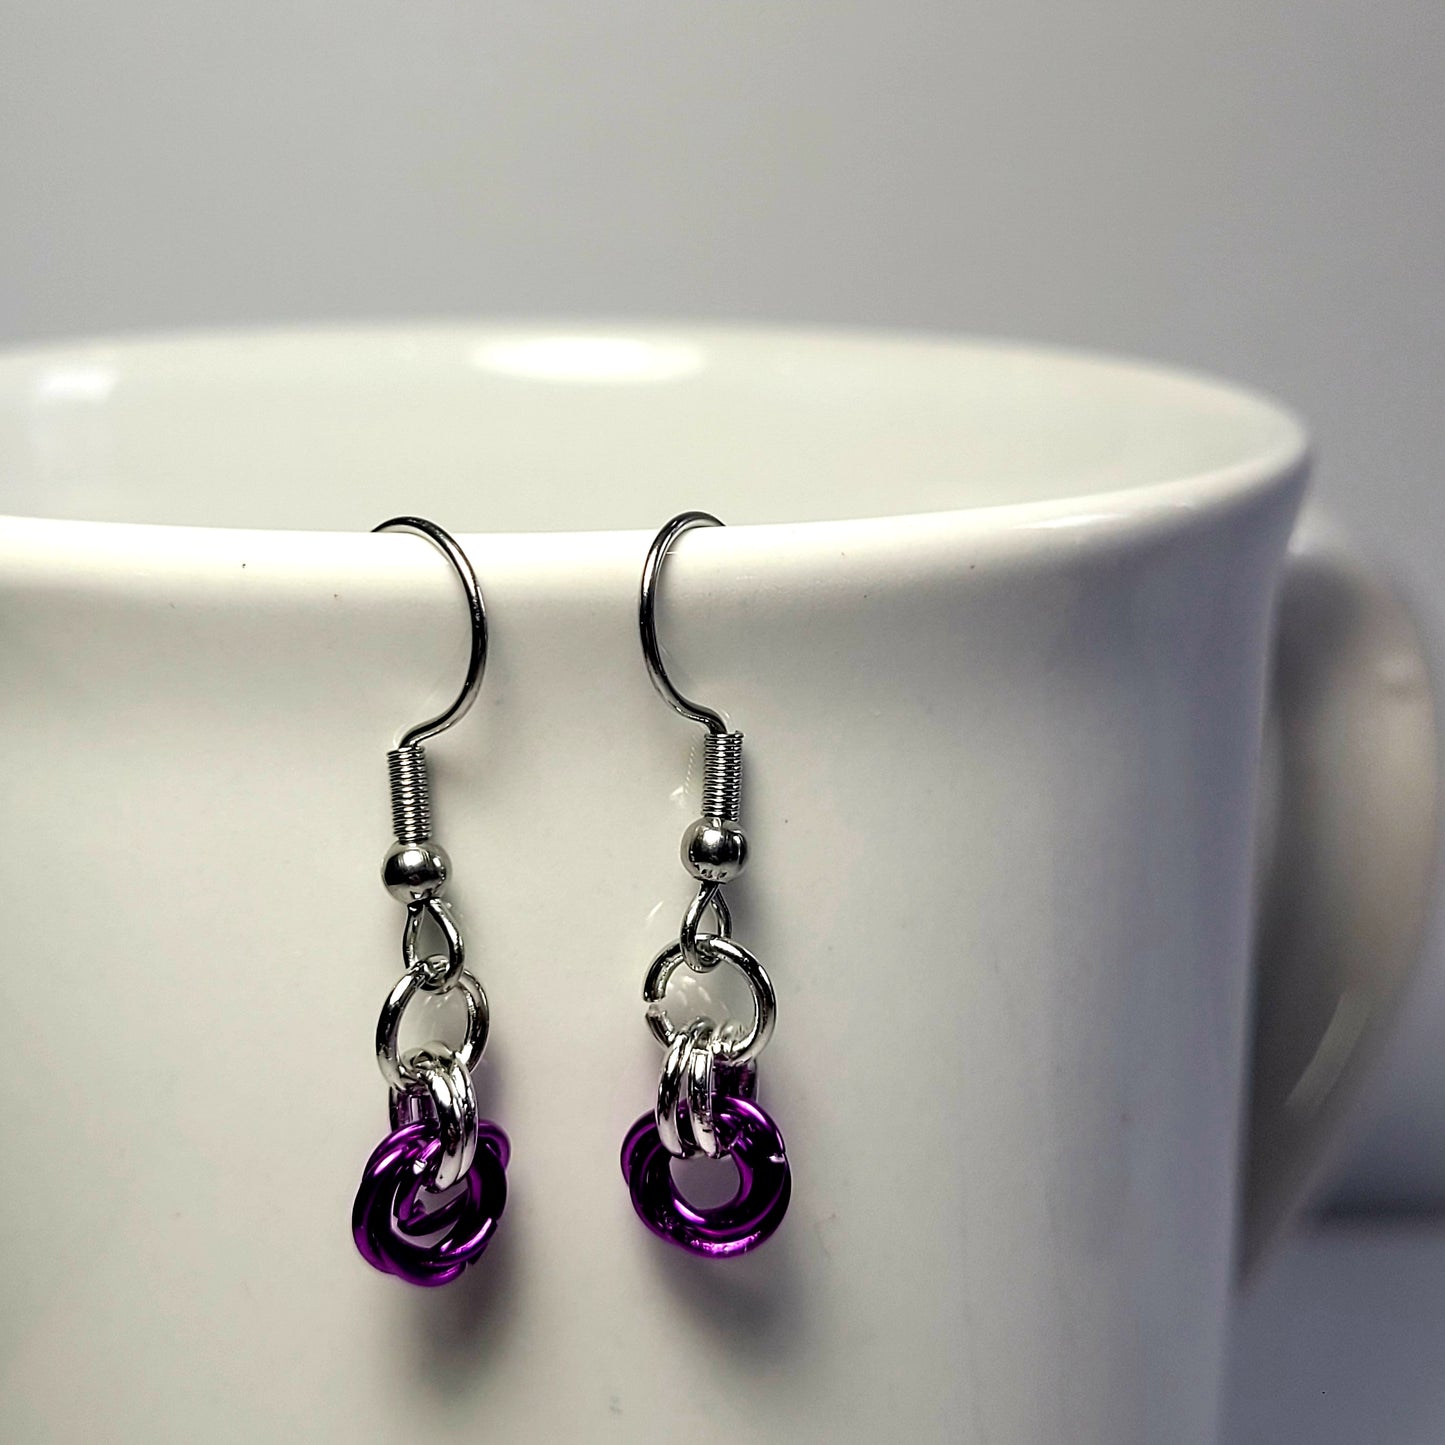 Earrings, purple and silver chainmail